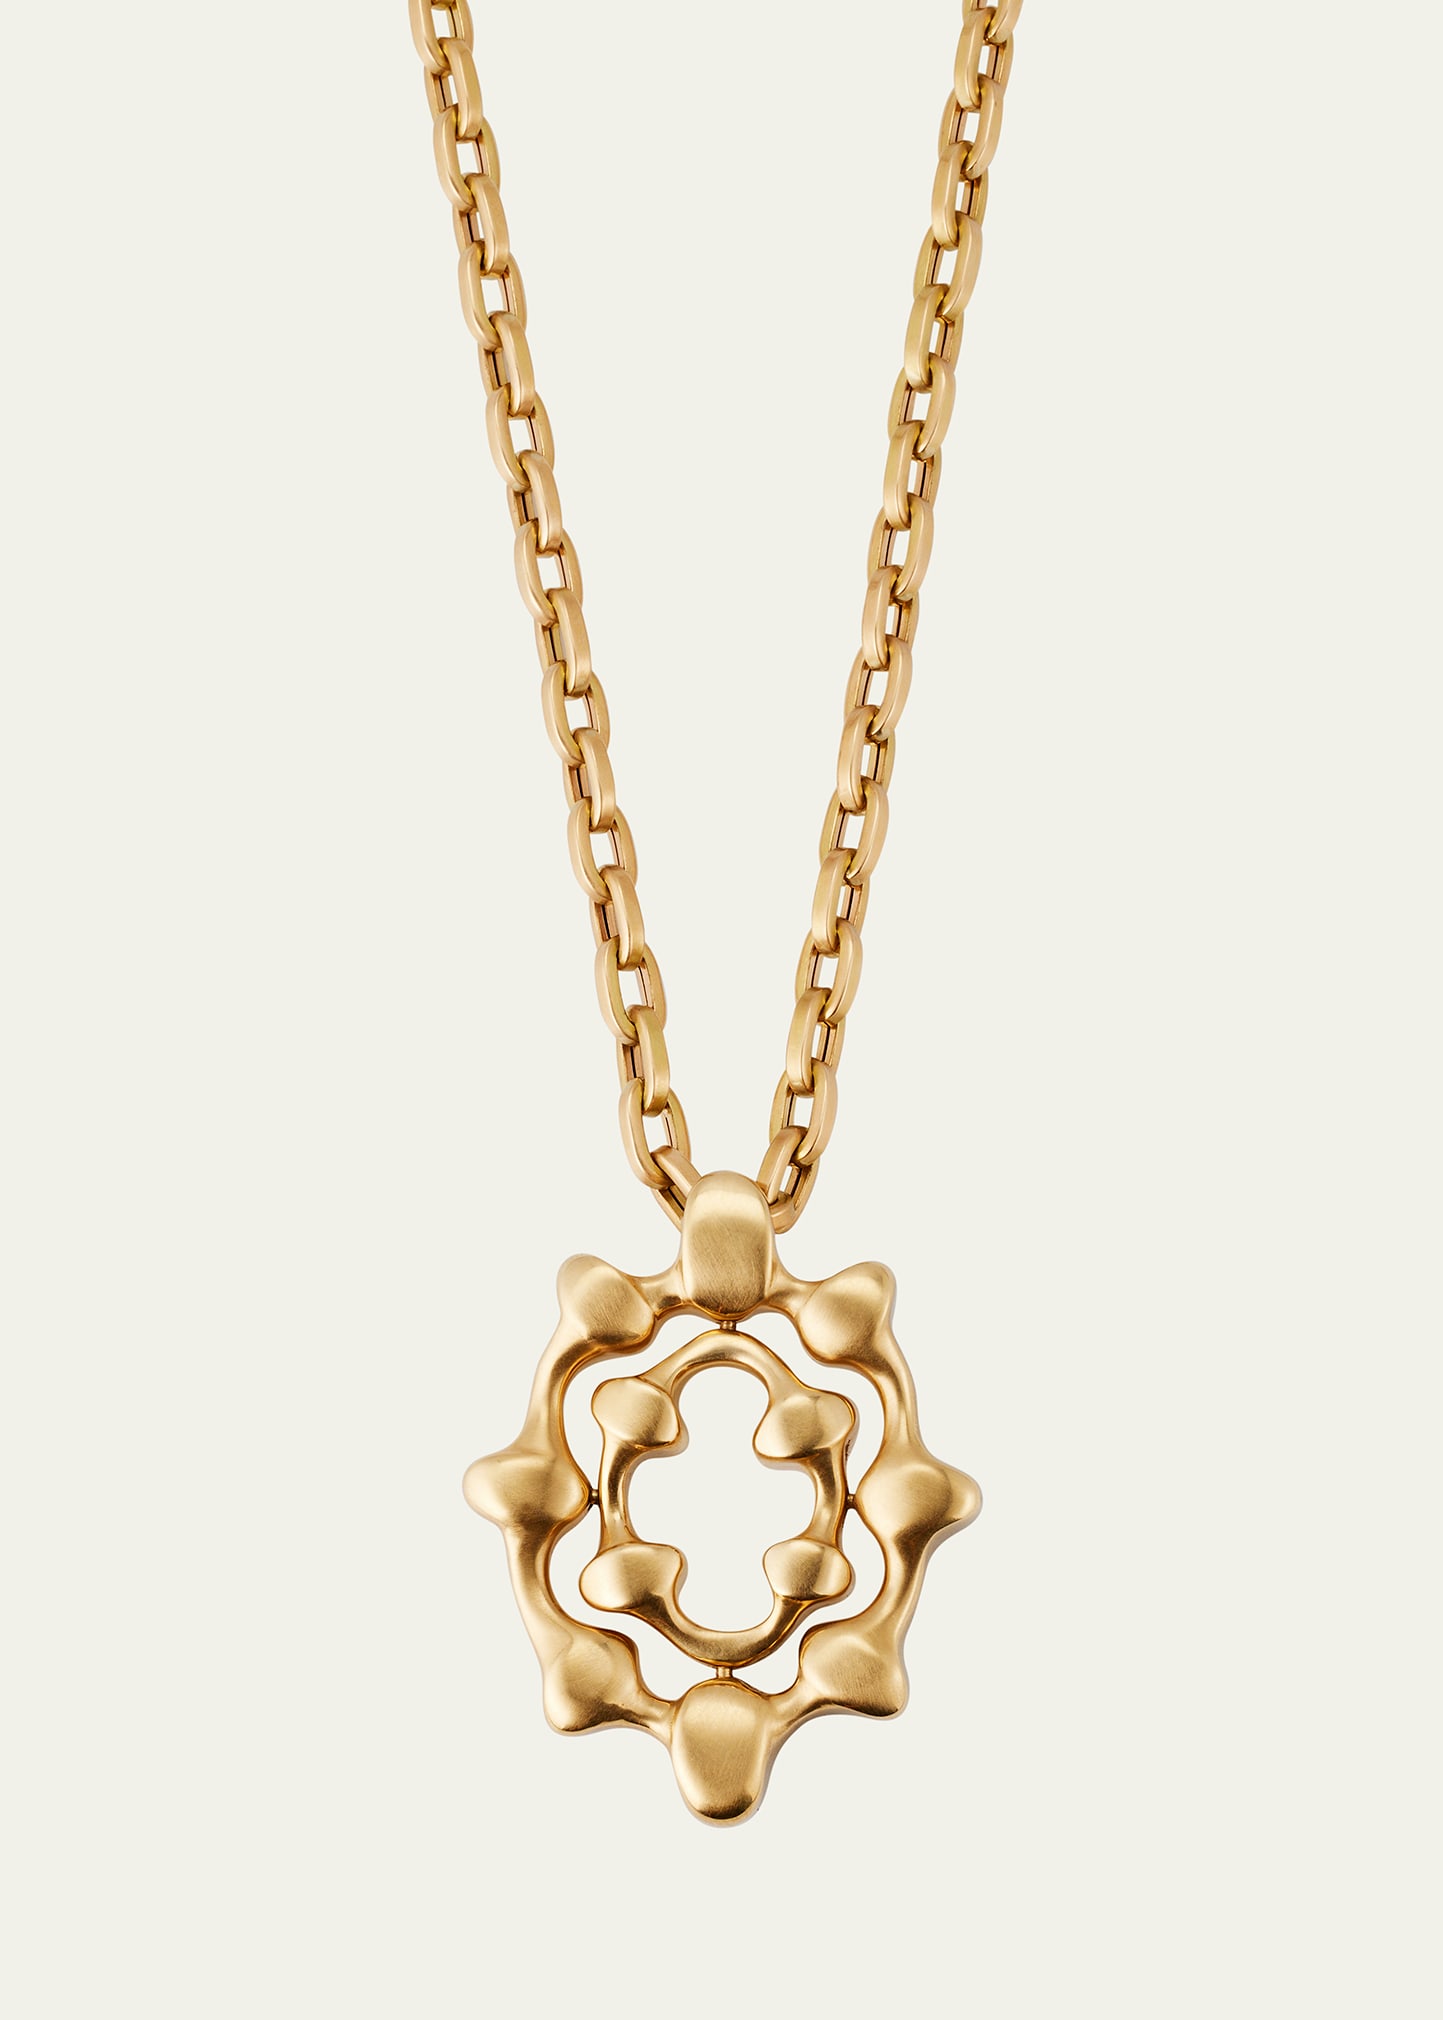 Yellow Gold Chrona Pendant on Chain Necklace, 35"L